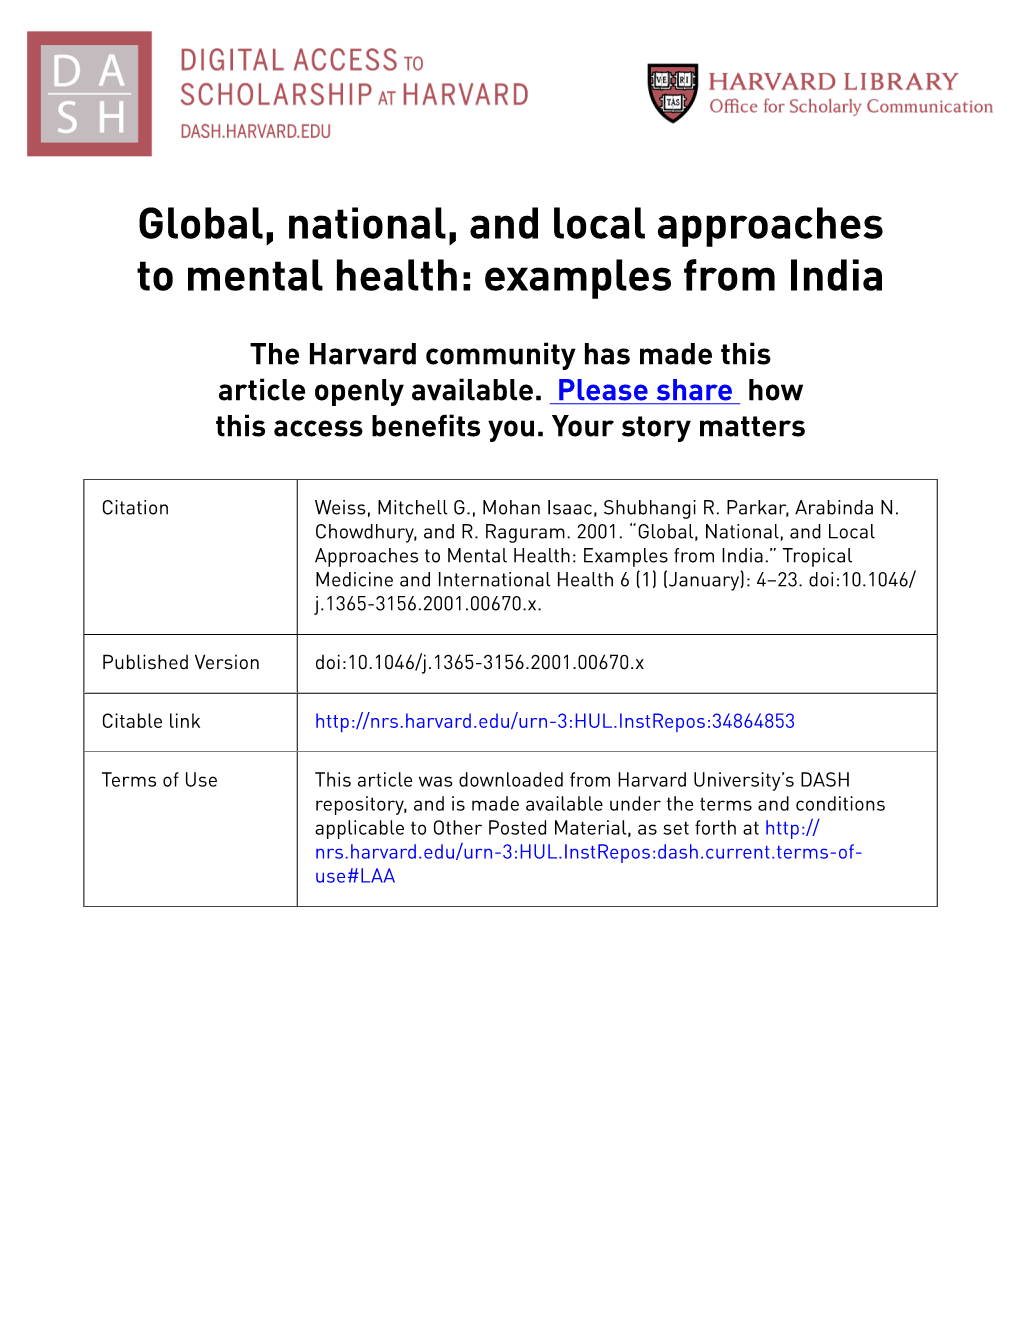 Global, National, and Local Approaches to Mental Health: Examples from India